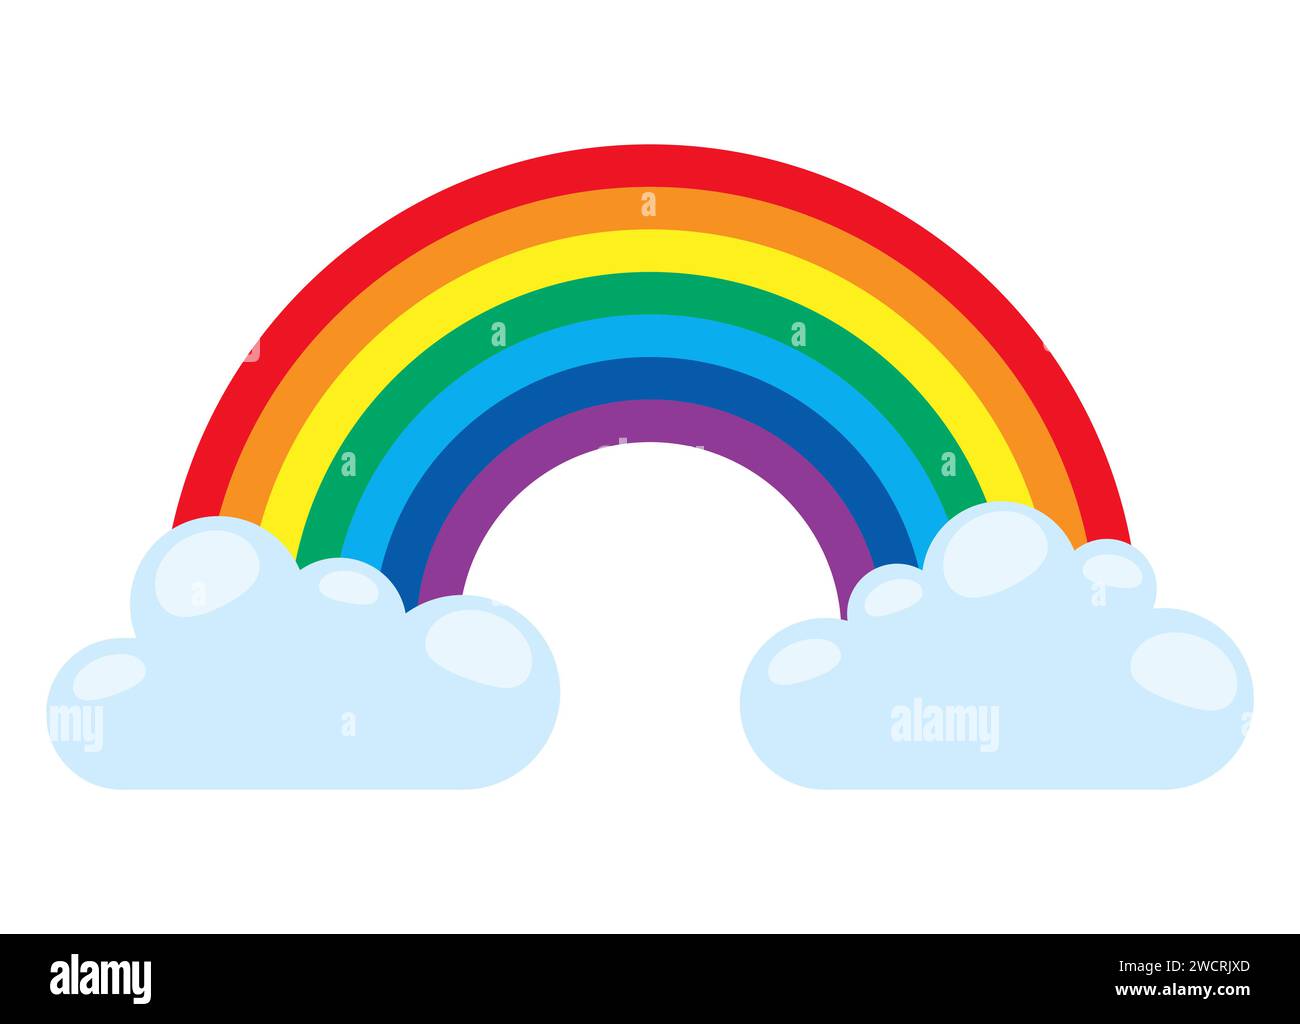 eps vector illustration showing wonderful colored rainbow with light blue clouds at the ends Stock Vector